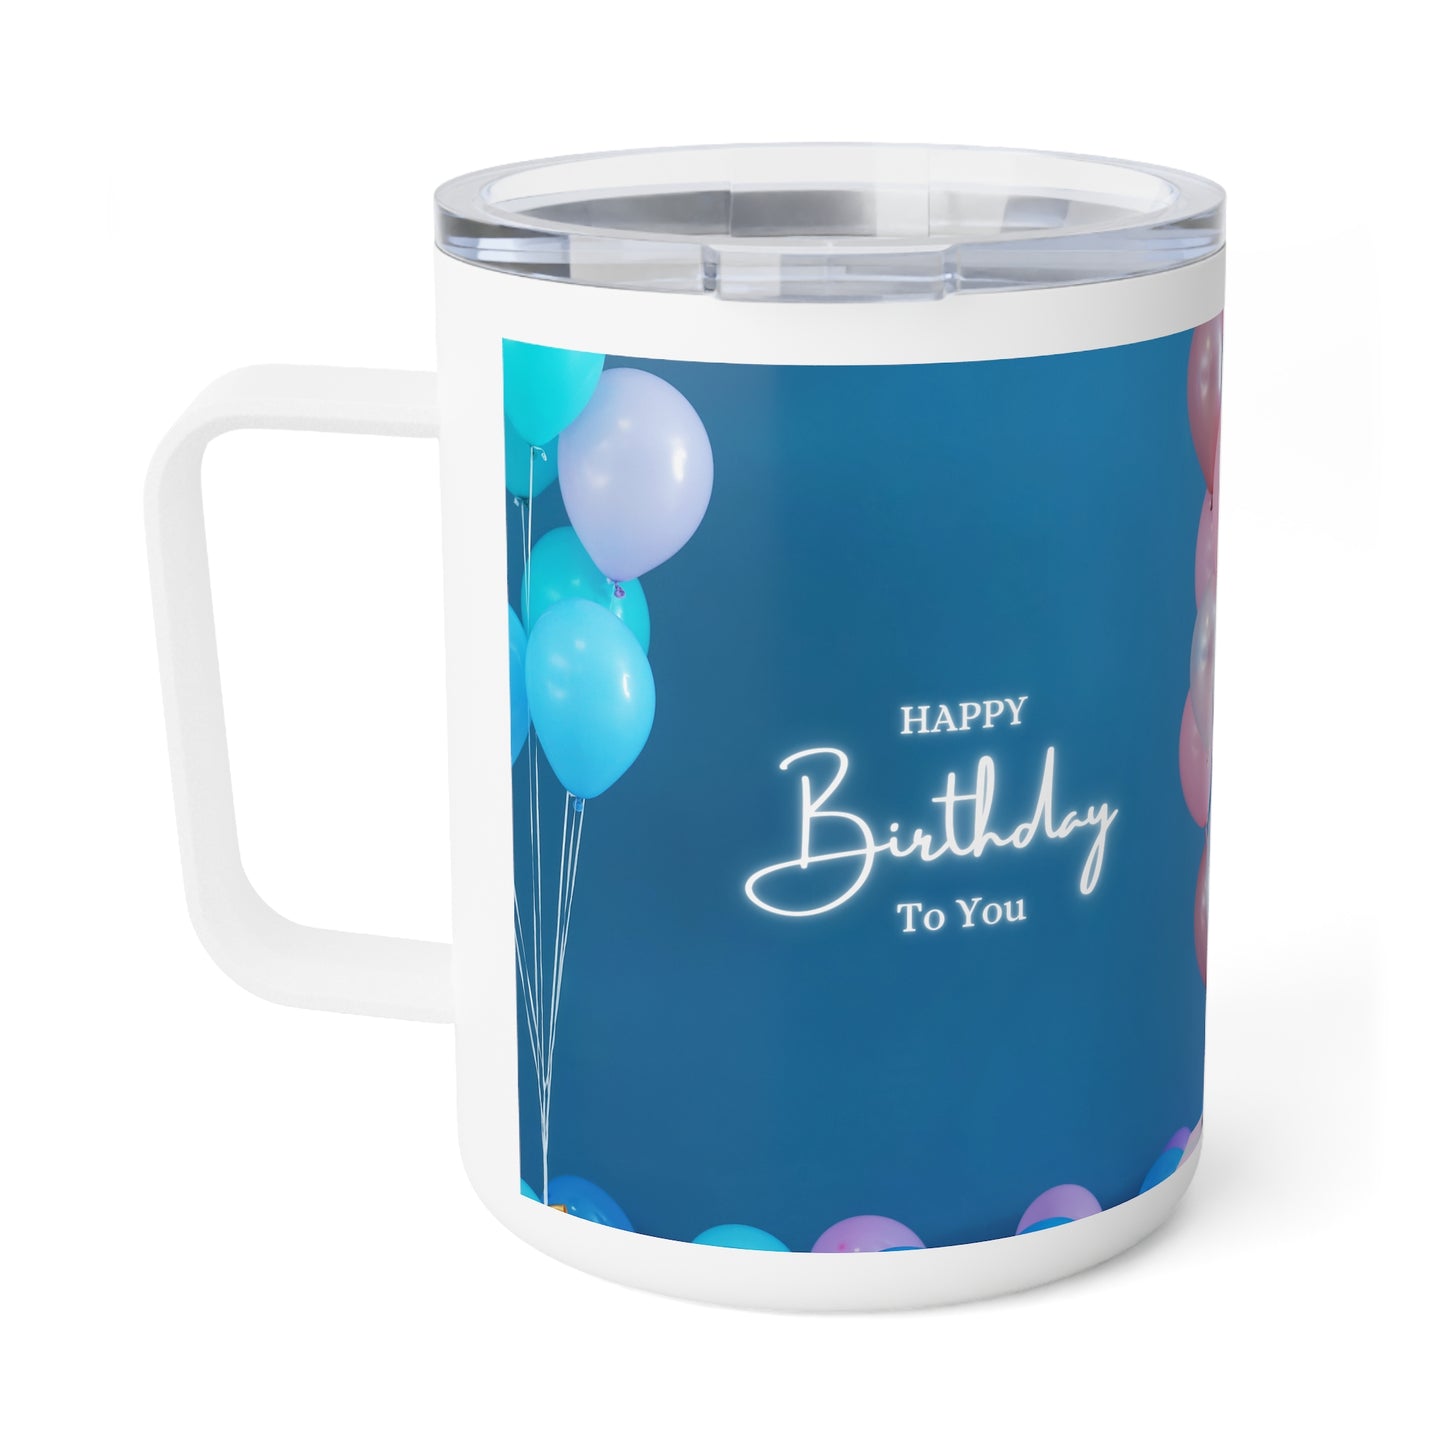 Happy Birthday to You Mugs for Him & Her, Blue